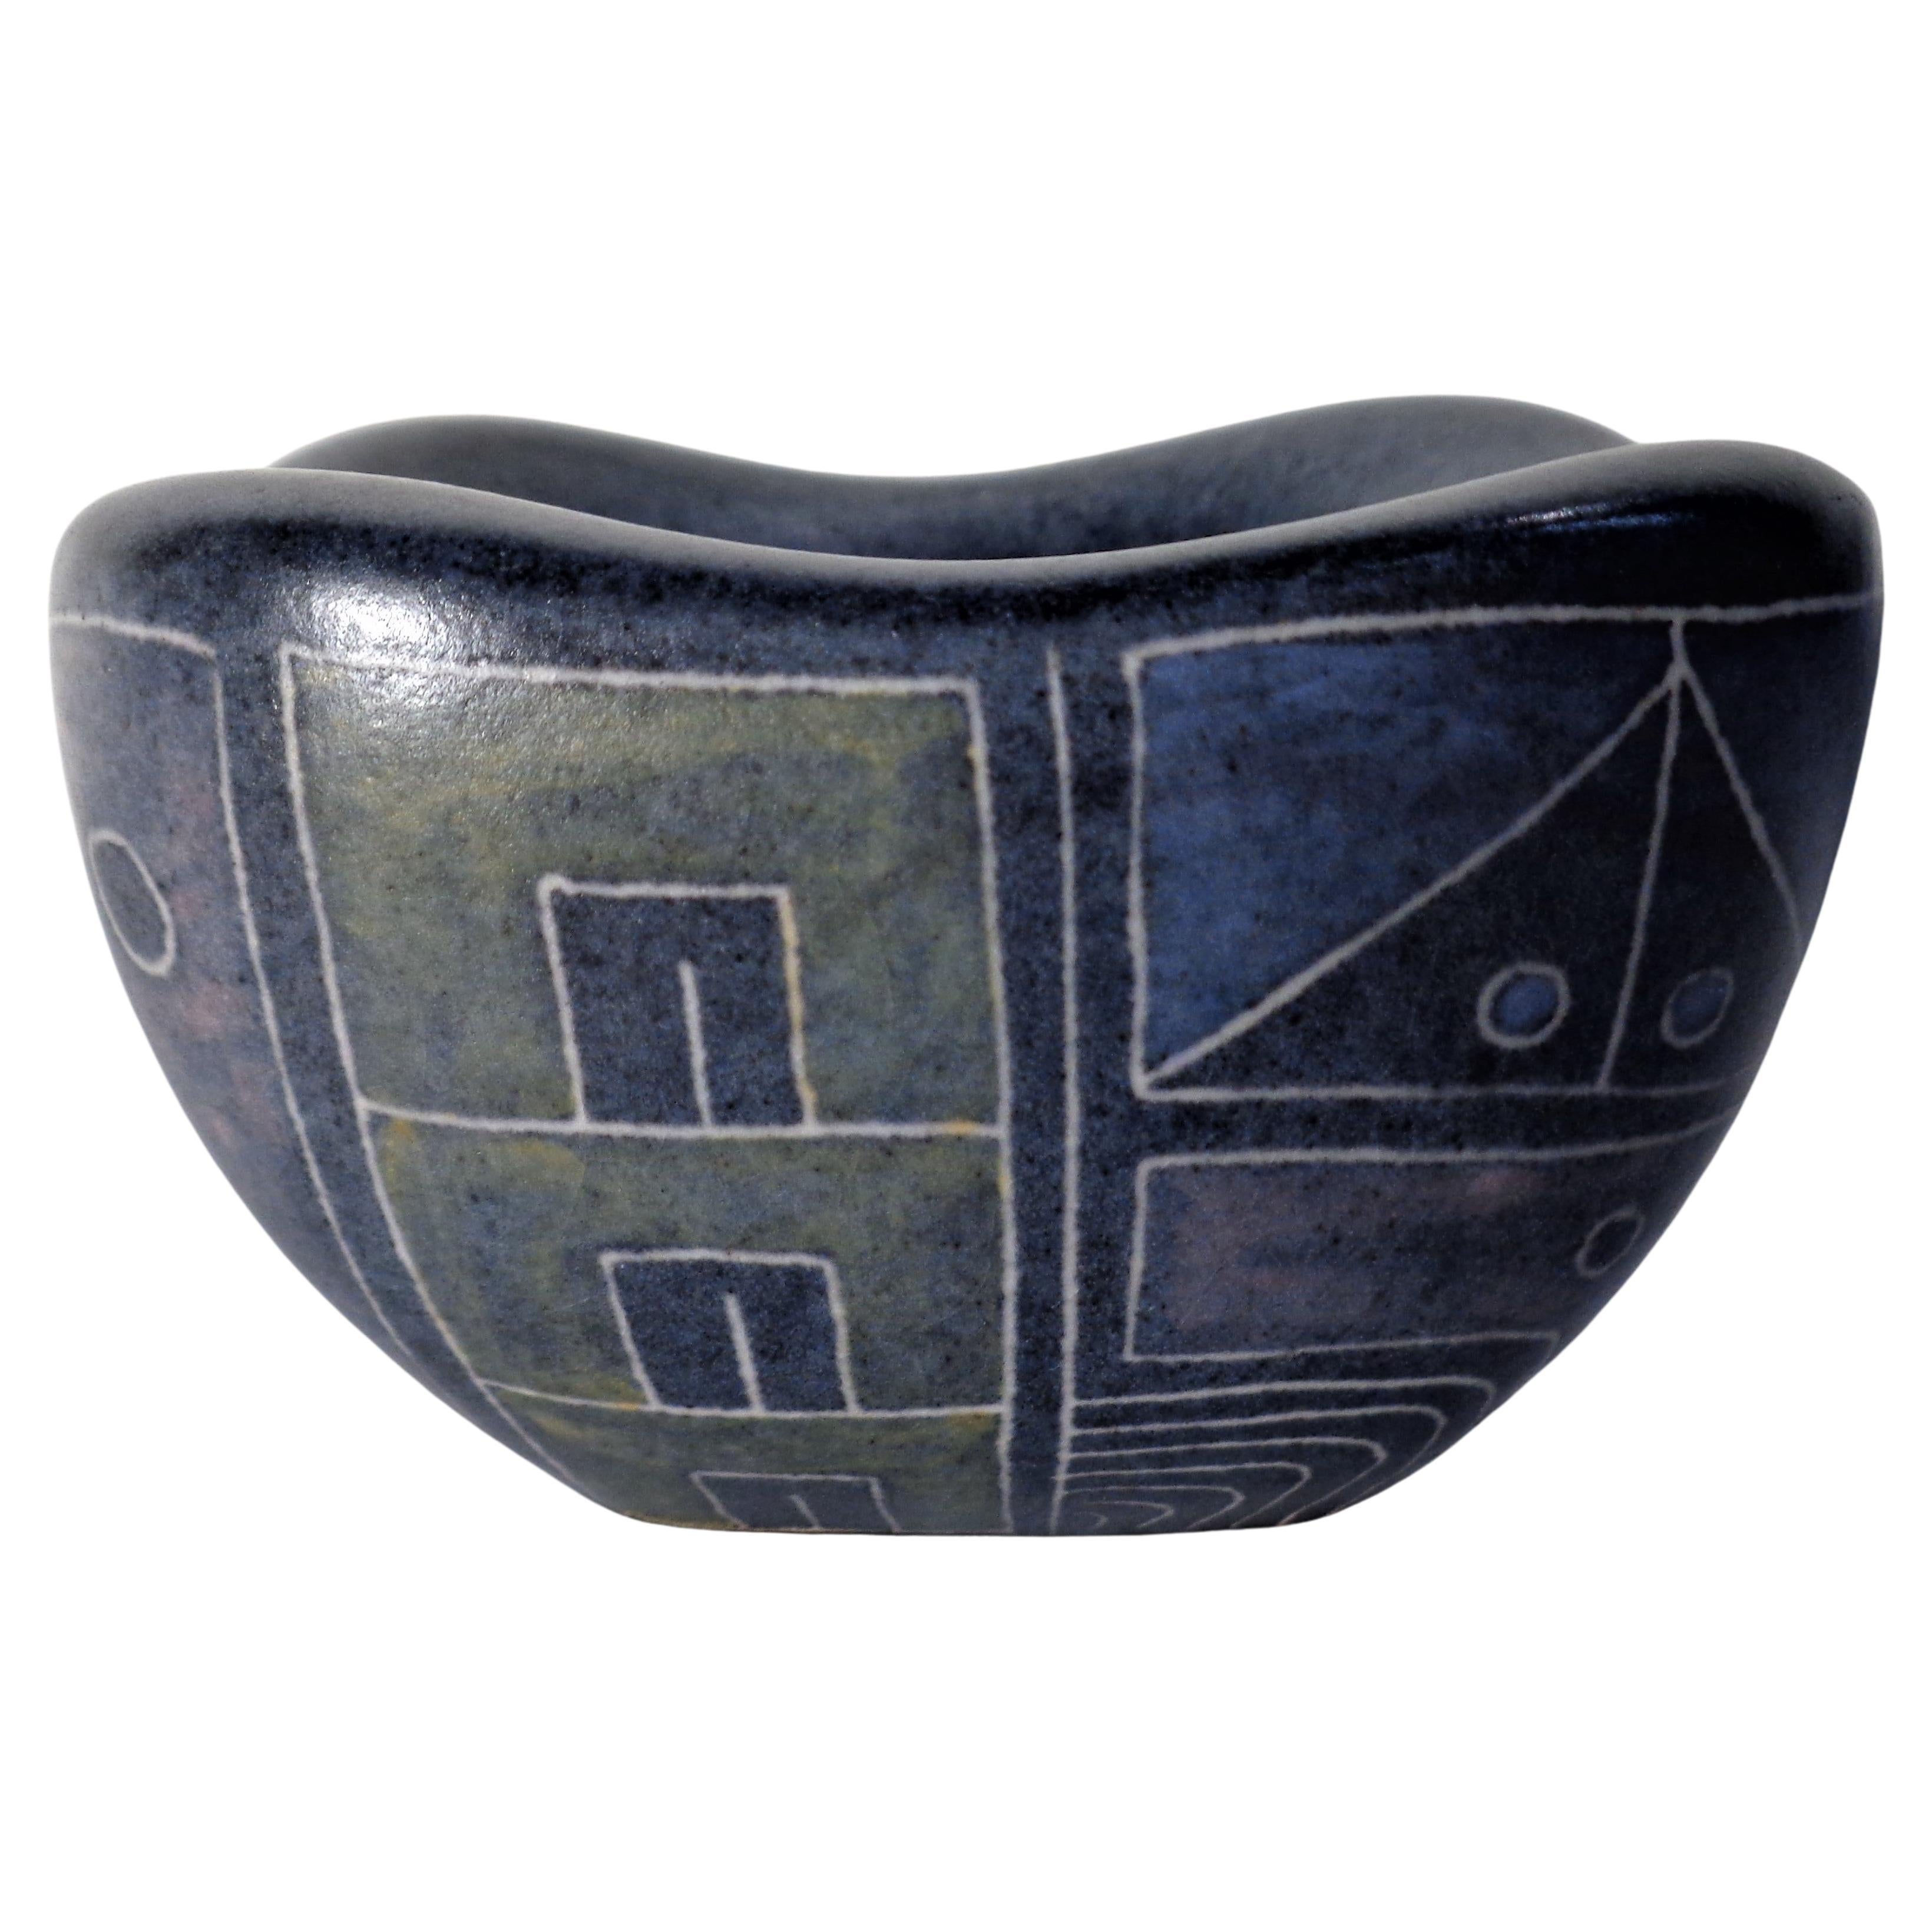  Lu Klopfer Geometric Sgrafitto Pottery Collection, Germany 1950's 2